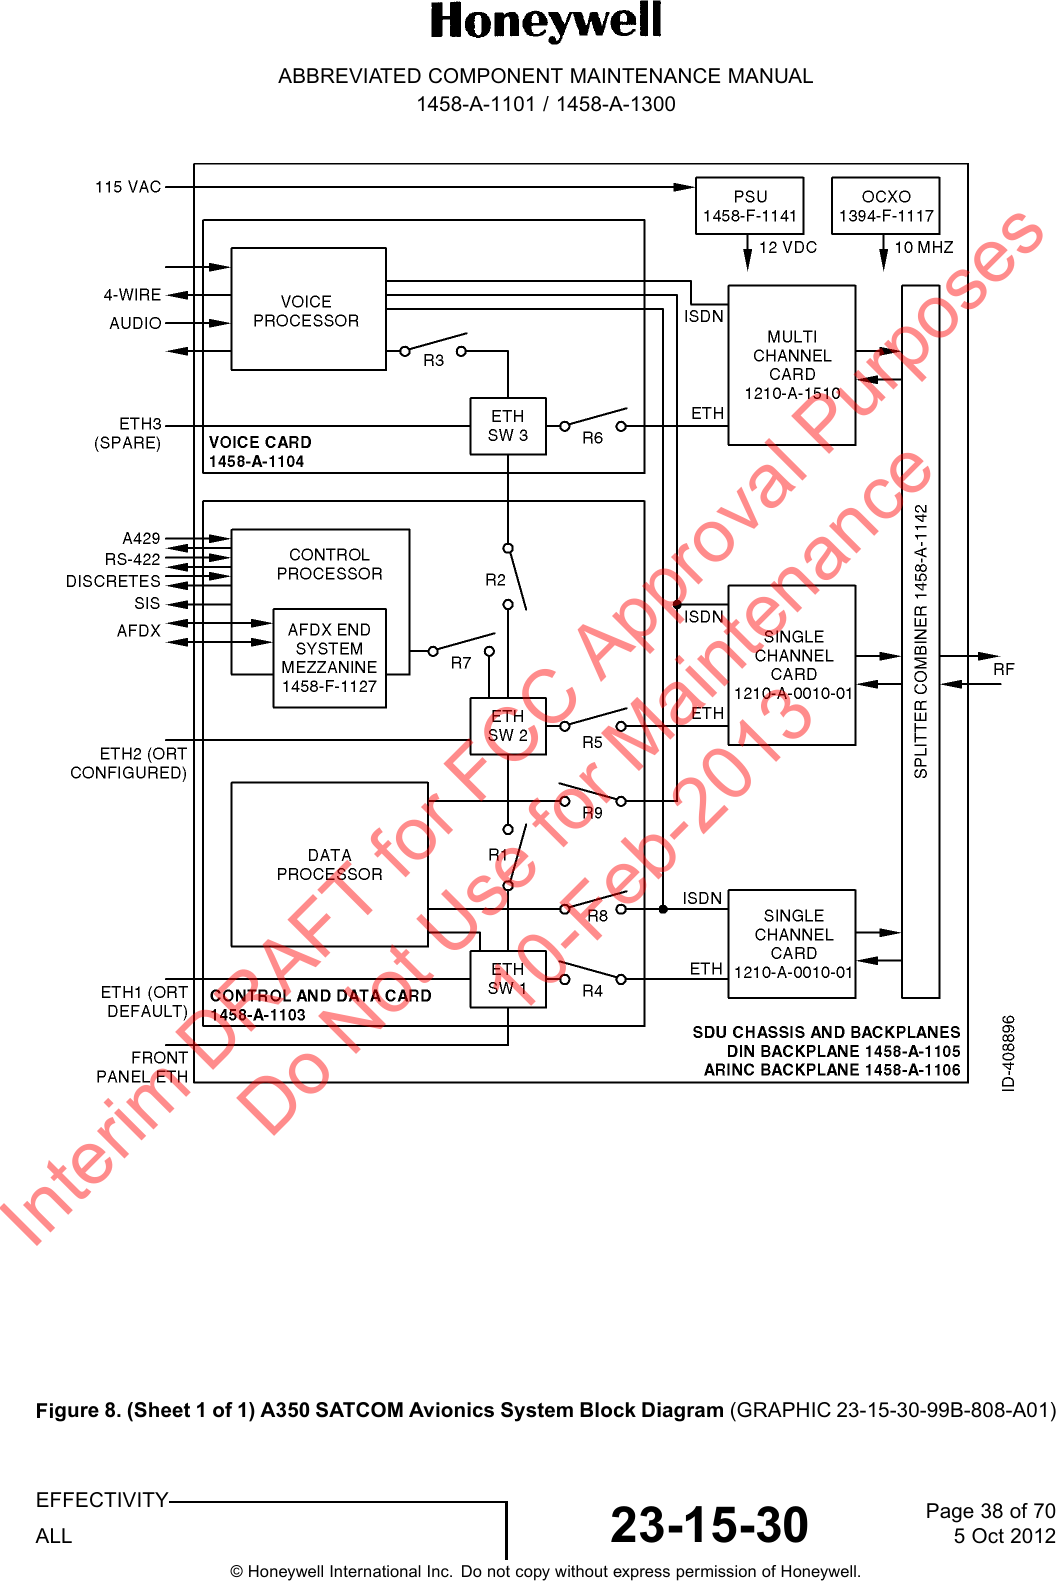 ABBREVIATED COMPONENT MAINTENANCE MANUAL1458-A-1101 / 1458-A-1300Figure 8. (Sheet 1 of 1) A350 SATCOM Avionics System Block Diagram (GRAPHIC 23-15-30-99B-808-A01)EFFECTIVITYALL 23-15-30 Page 38 of 705 Oct 2012© Honeywell International Inc. Do not copy without express permission of Honeywell.Interim DRAFT for FCC Approval Purposes Do Not Use for Maintenance 10-Feb-2013